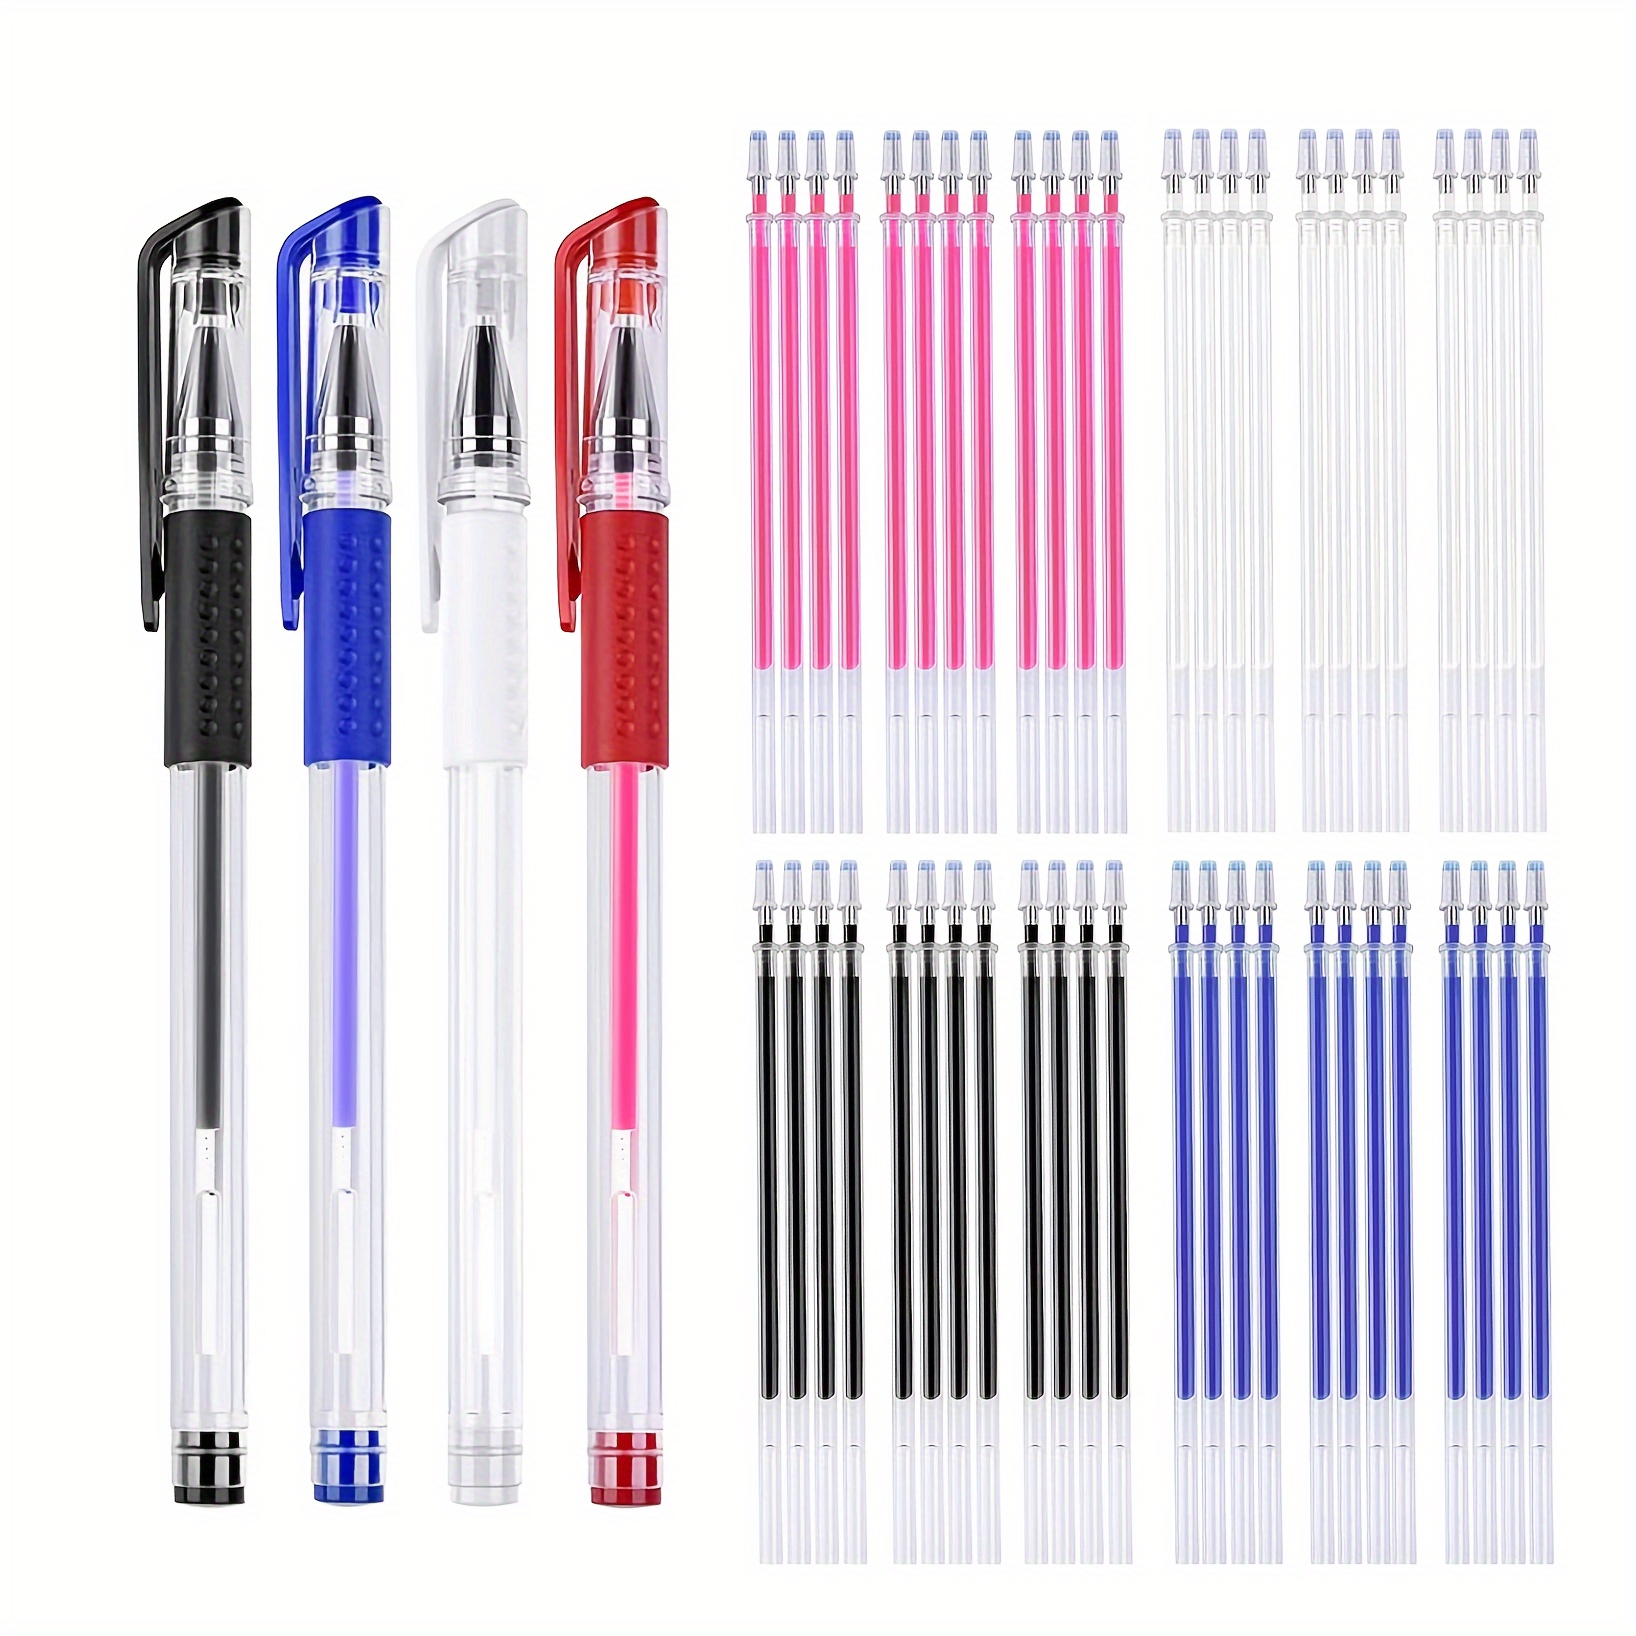 

Heat Erasable Fabric Marking Pens Set - 4/8 Pieces With 56 Refills For Quilting, Sewing, And Diy Projects - Smooth Writing Tailors' Pens In White, Red, Blue